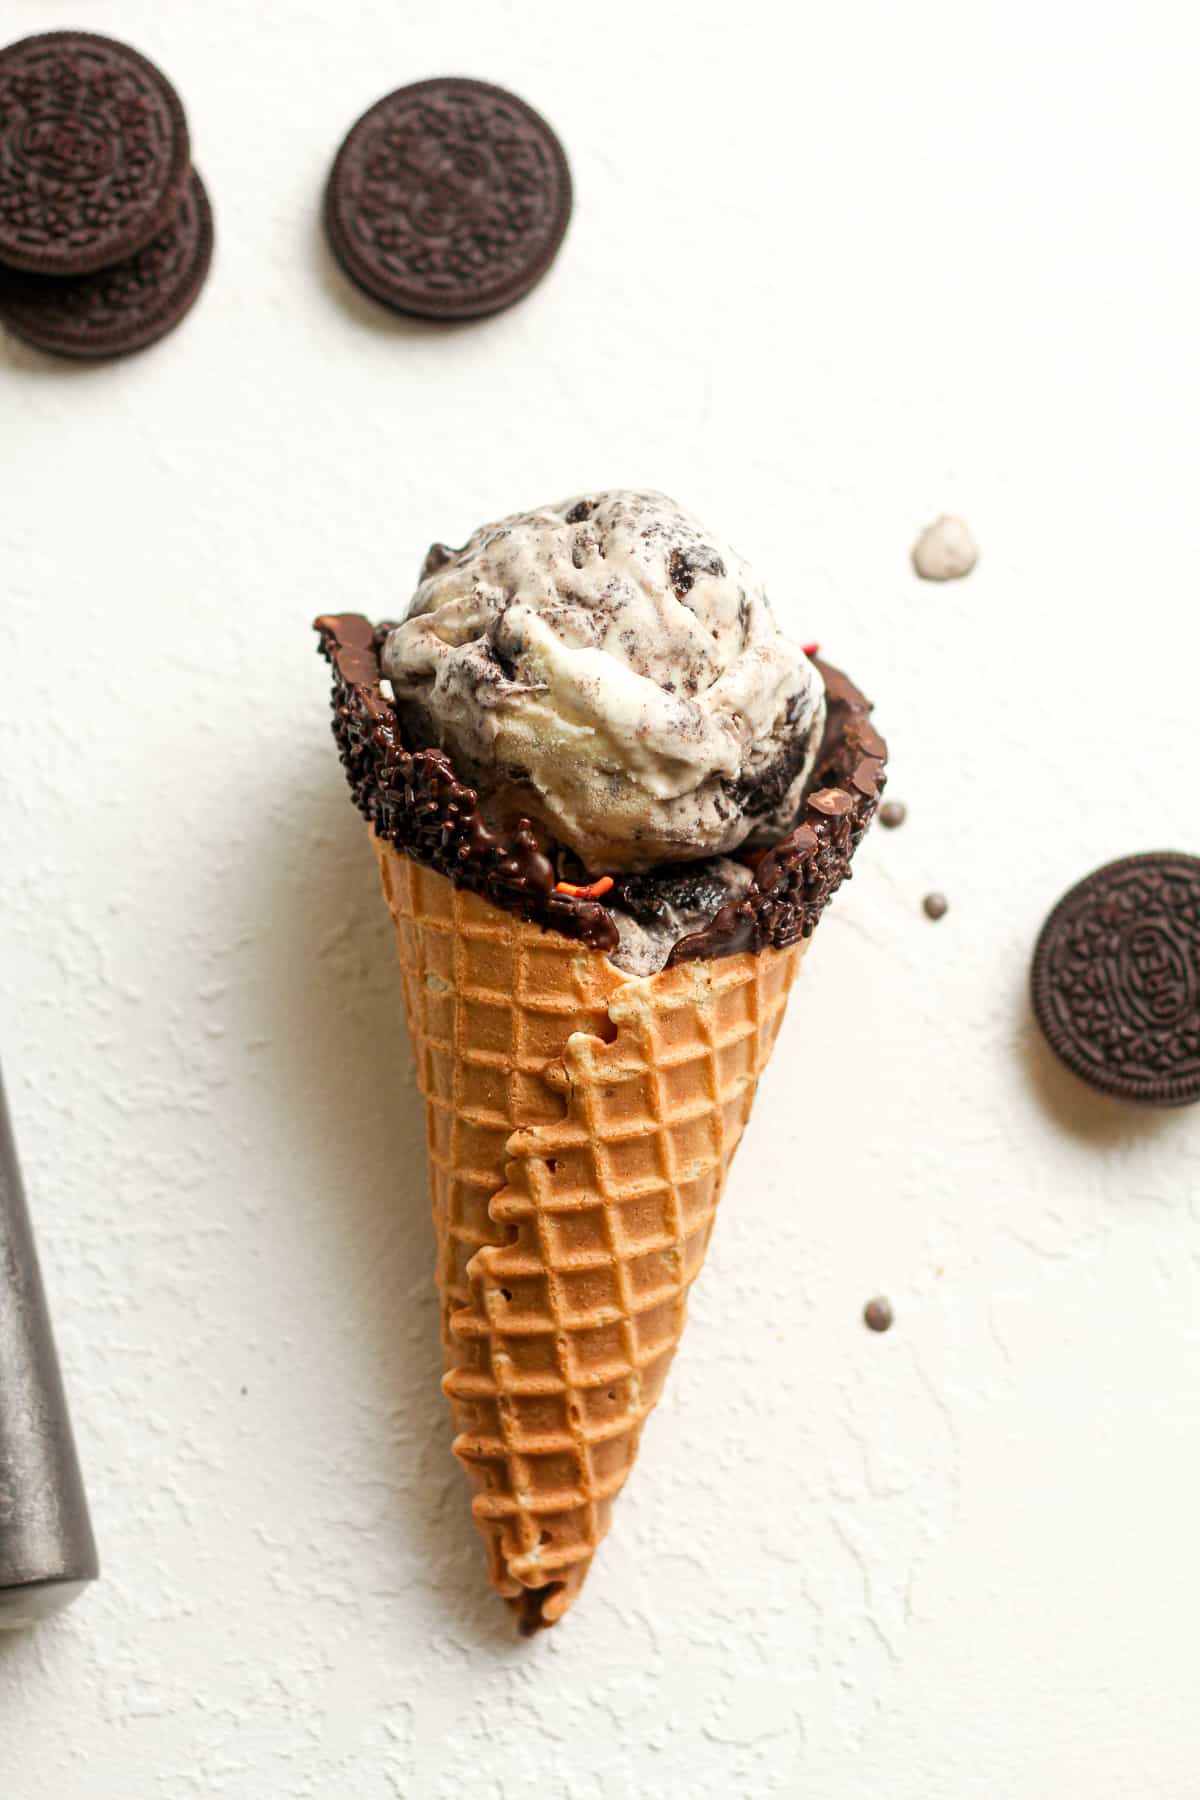 A waffle cone filled with cookies and cream ice cream, lying on a white surface.